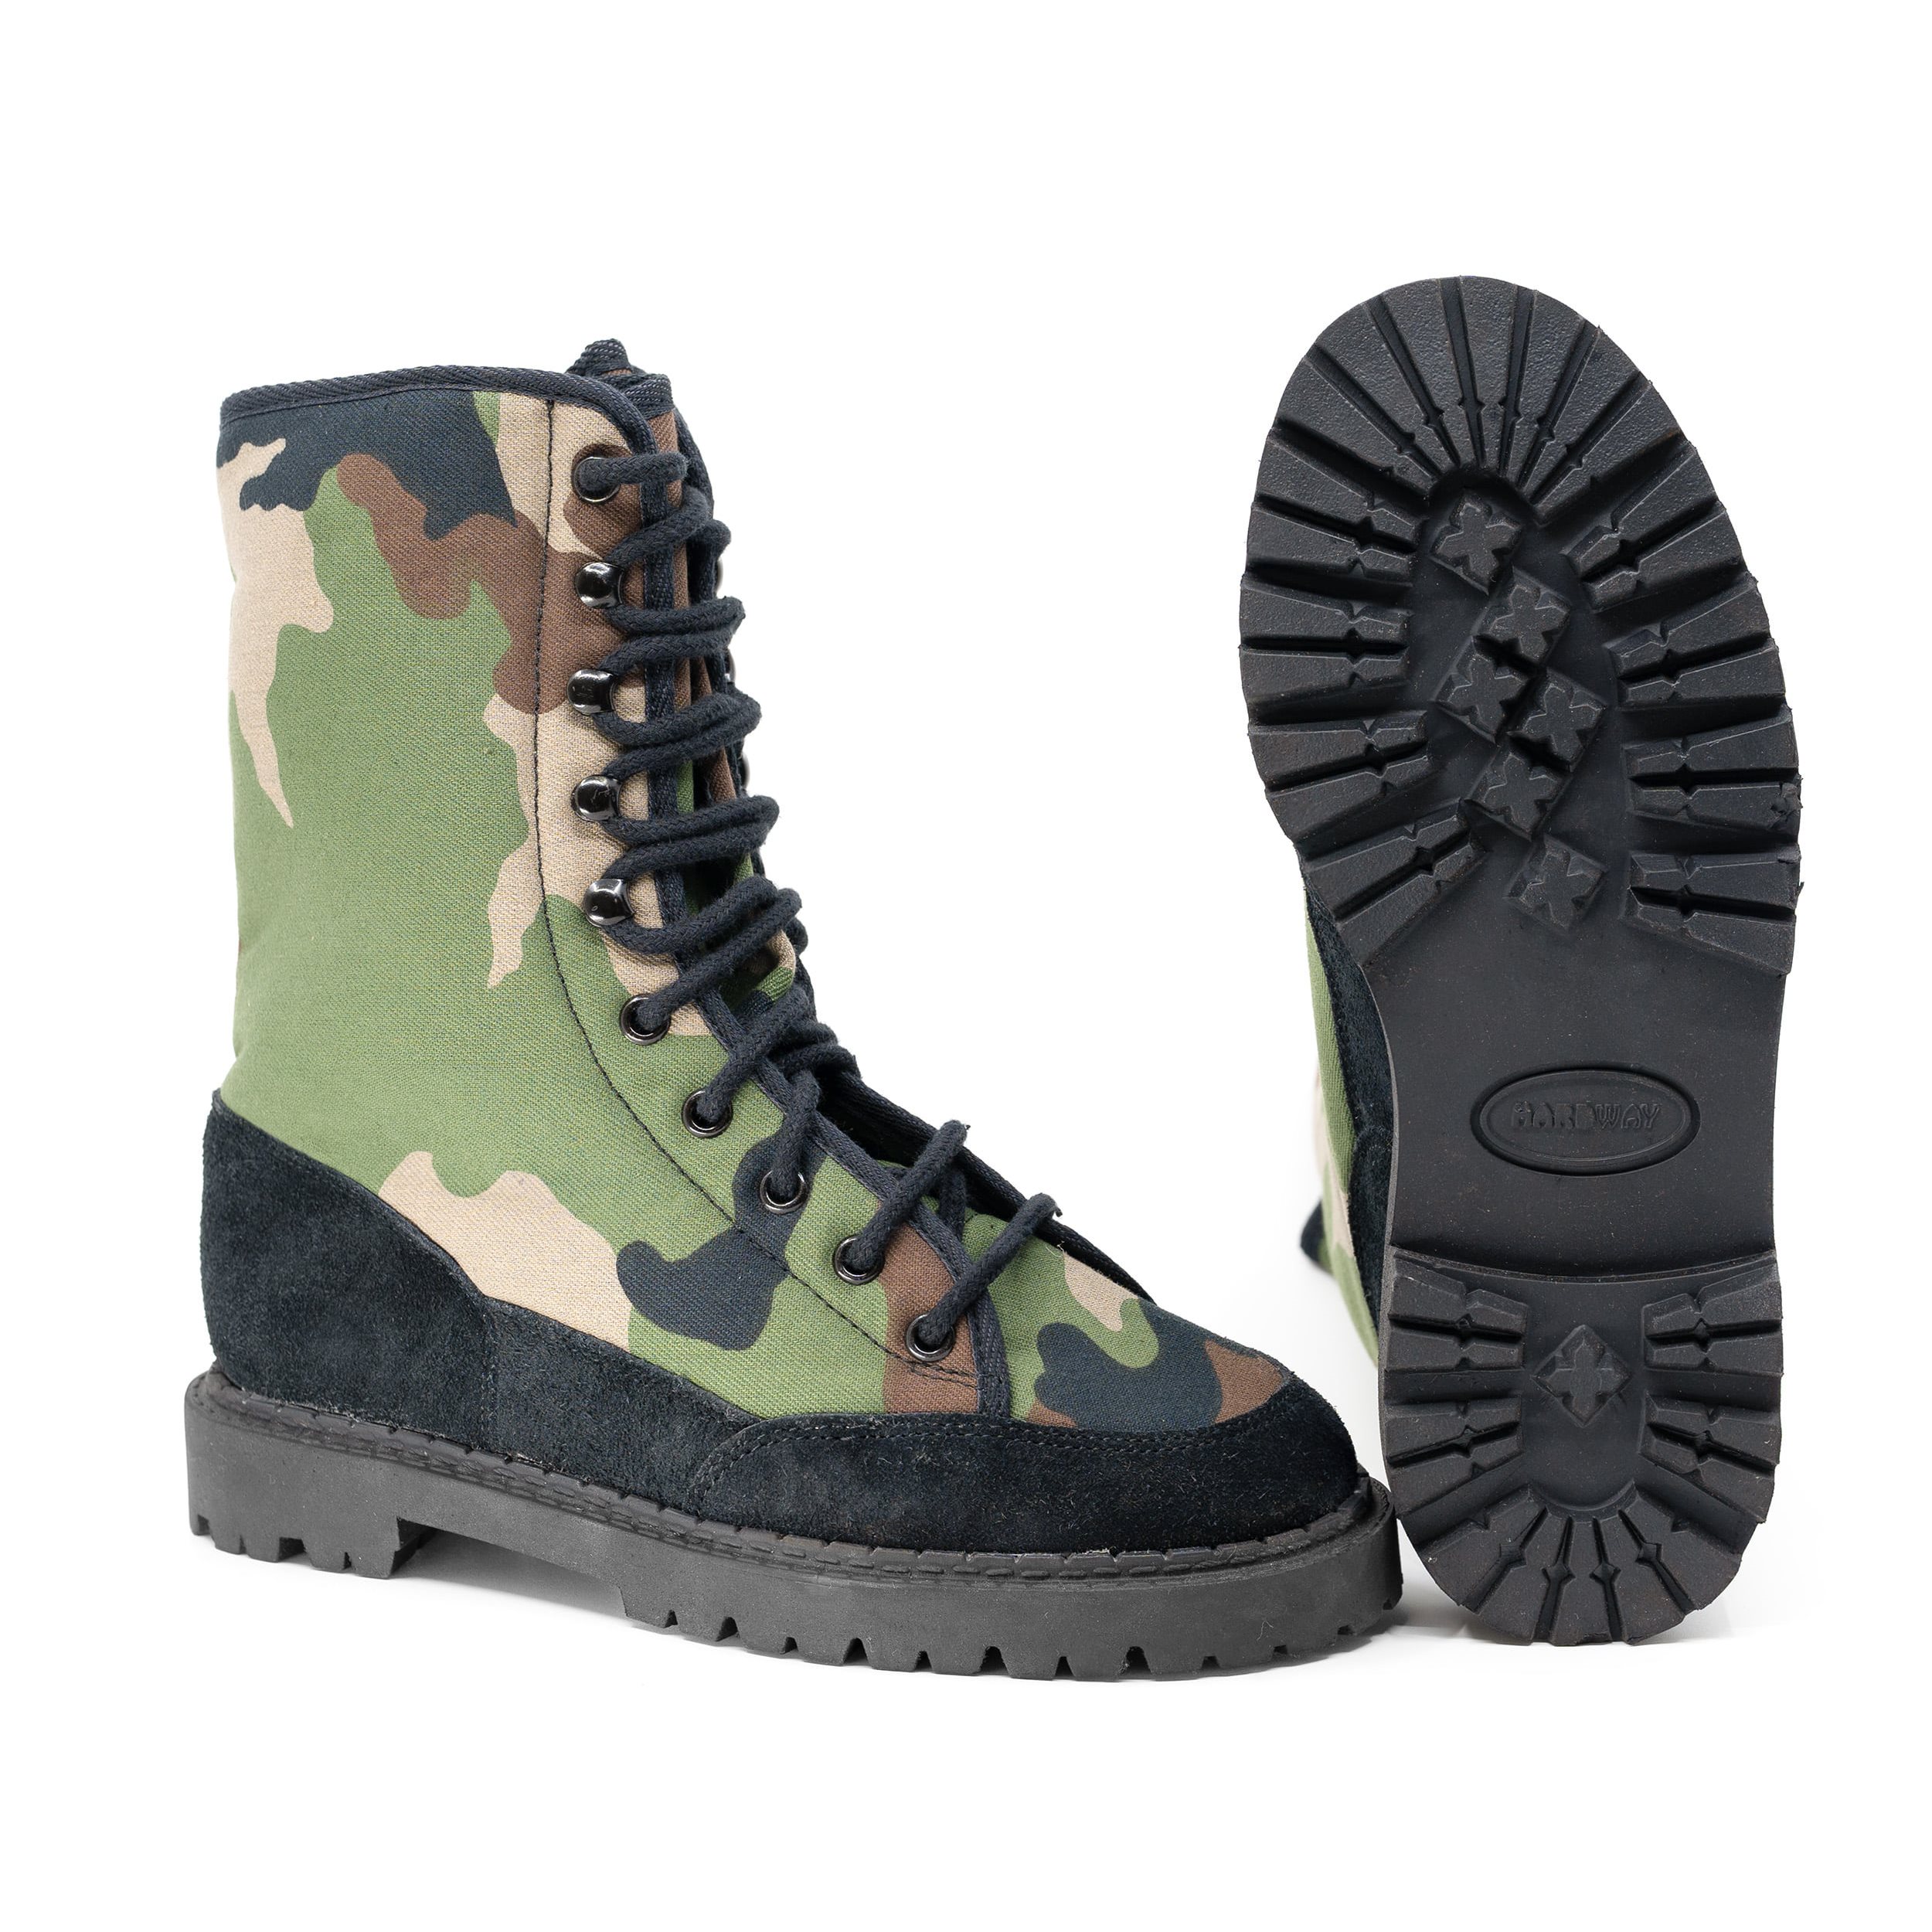 Shoes canvas invasions Special masked M97 Slovak Army 729247 L-11